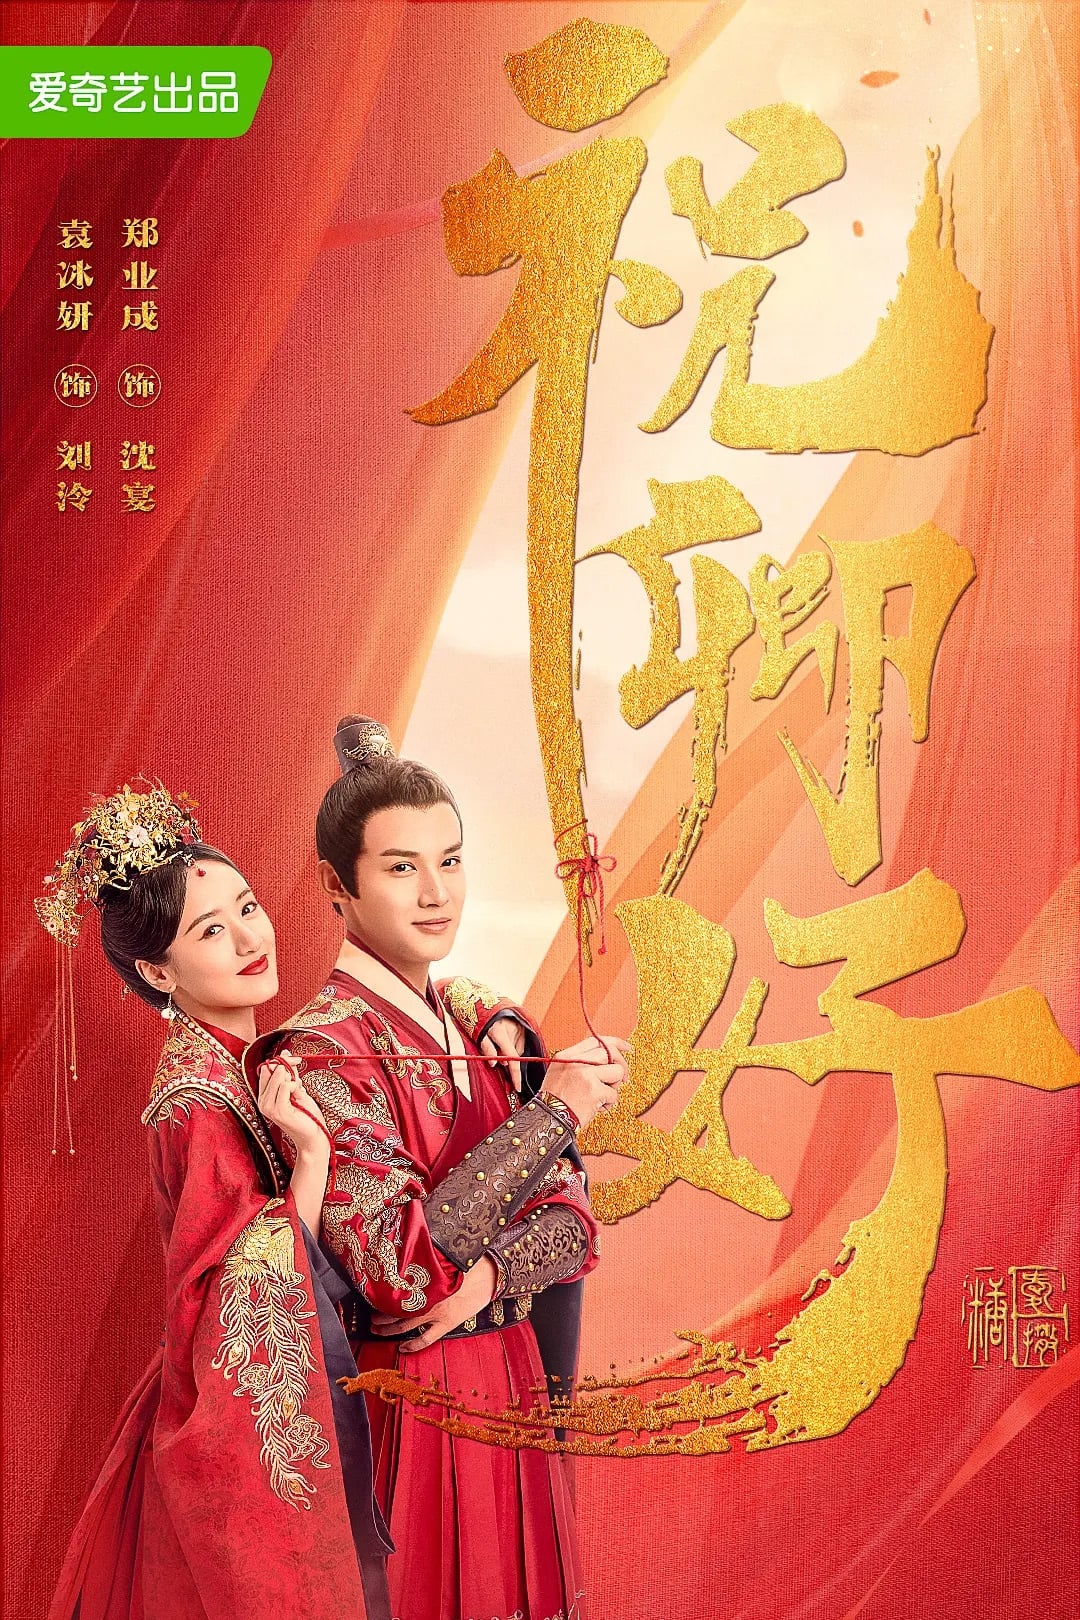 TV ratings for My Sassy Princess (祝卿好) in New Zealand. iqiyi TV series